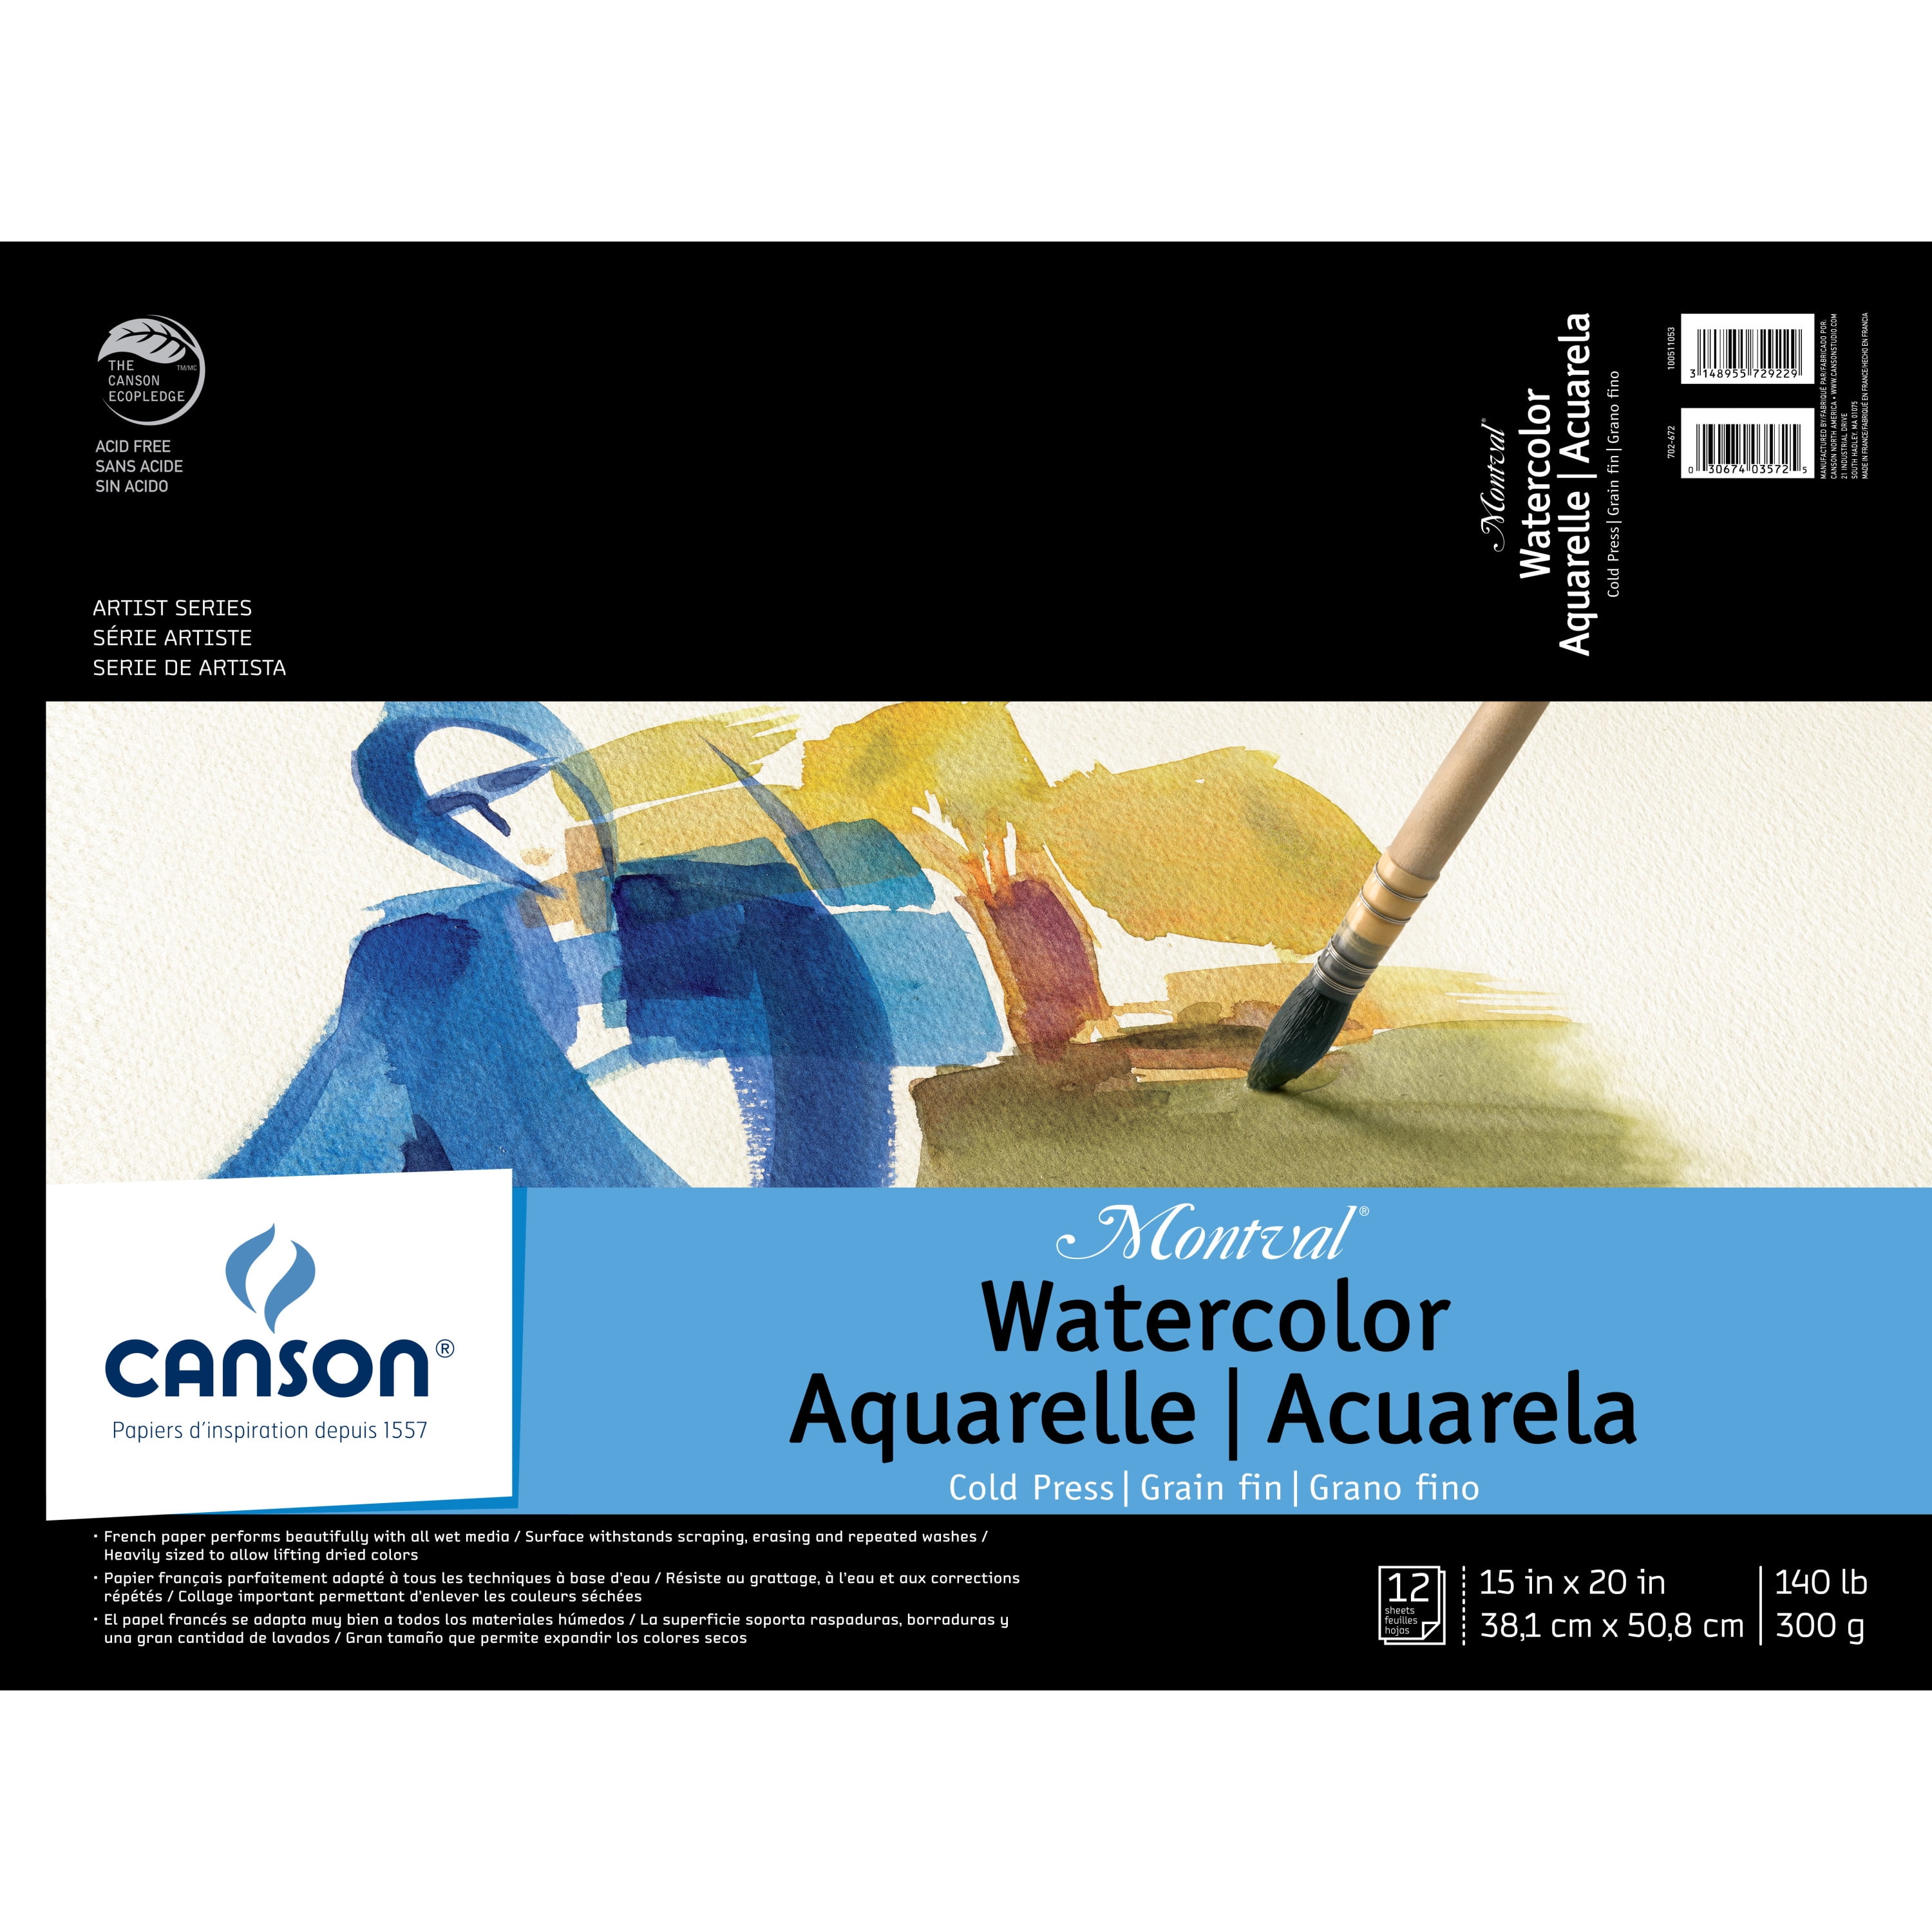  MEEDEN 15×10.2 Cotton Watercolor Paper Textured Surface  Watercolor Pad, Cold Press, 140lb/300gsm, 20 Sheets for Painting & Drawing,  Wet, Mixed Media: Paintings